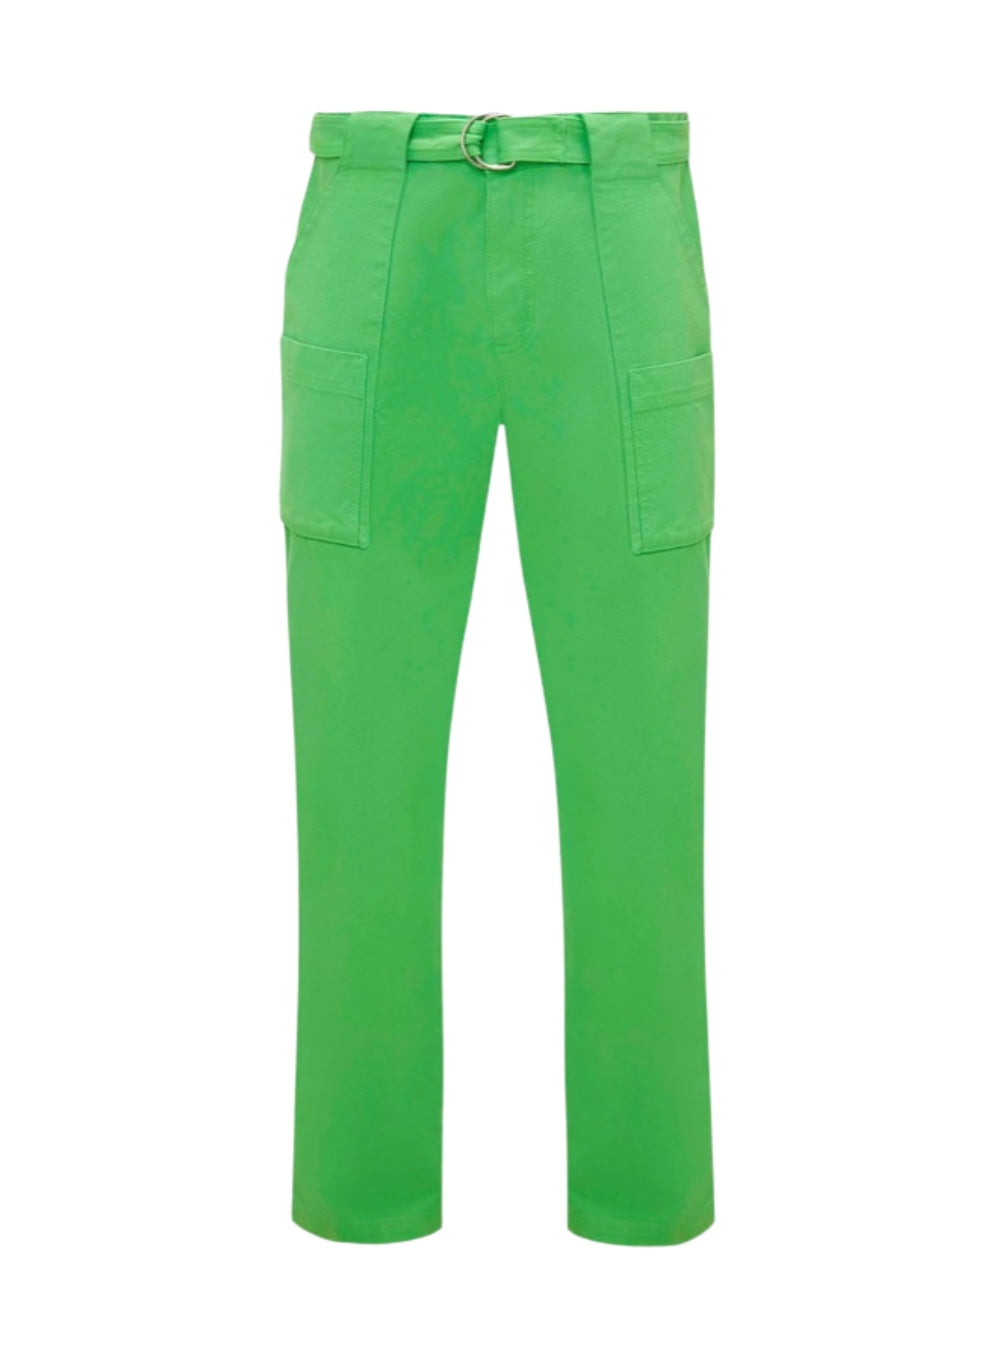 J.W. ANDERSON | Dyed Cargo Trousers